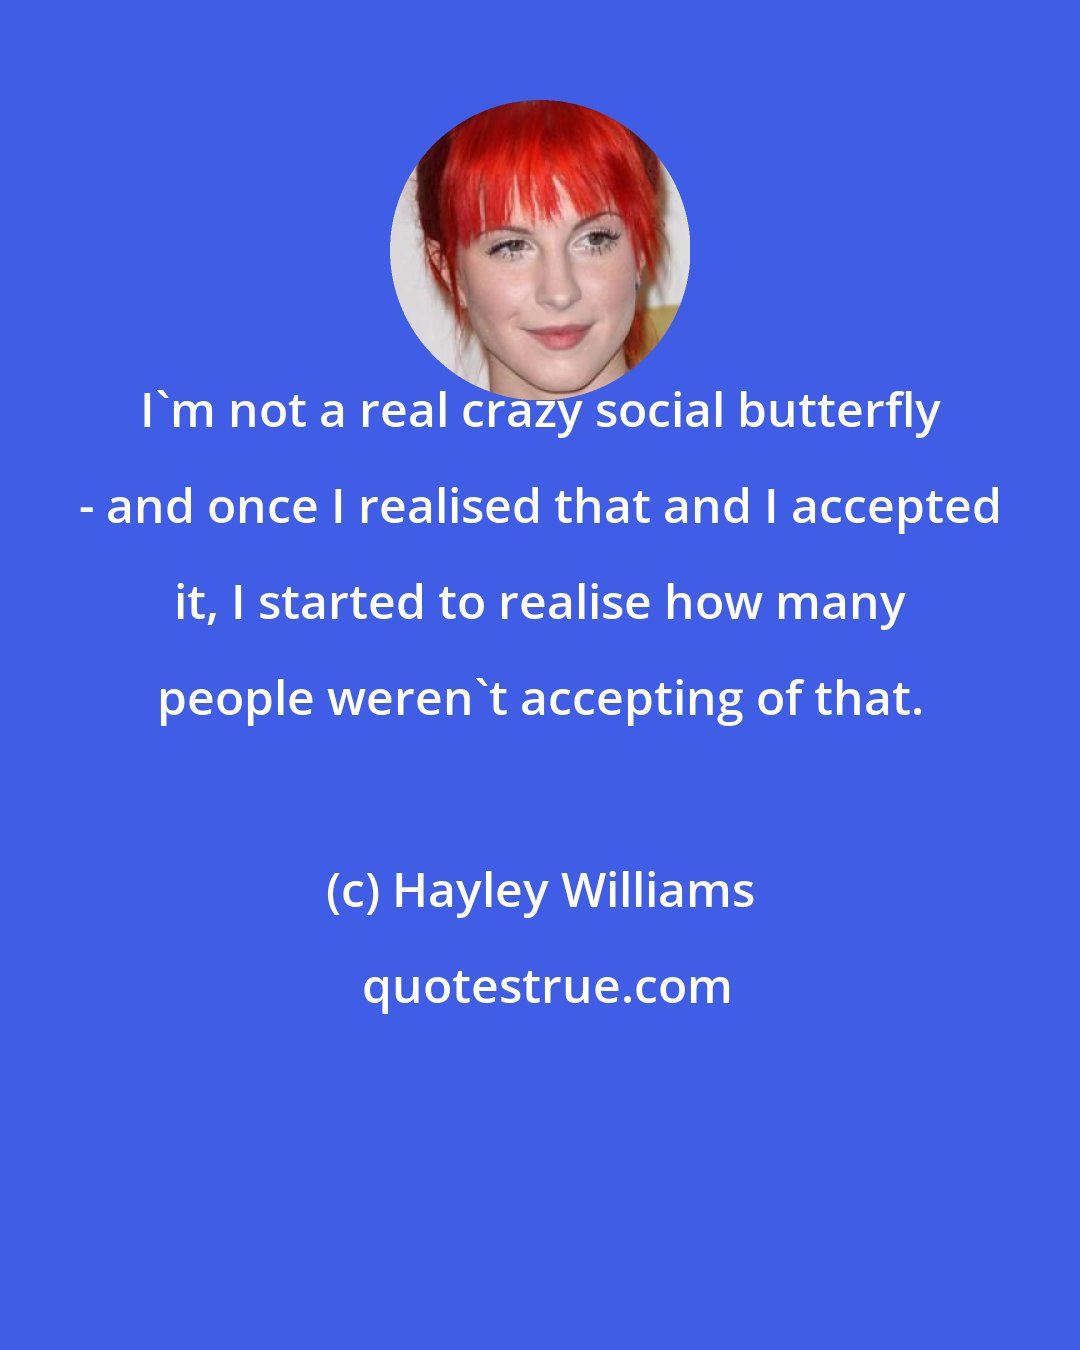 Hayley Williams: I'm not a real crazy social butterfly - and once I realised that and I accepted it, I started to realise how many people weren't accepting of that.